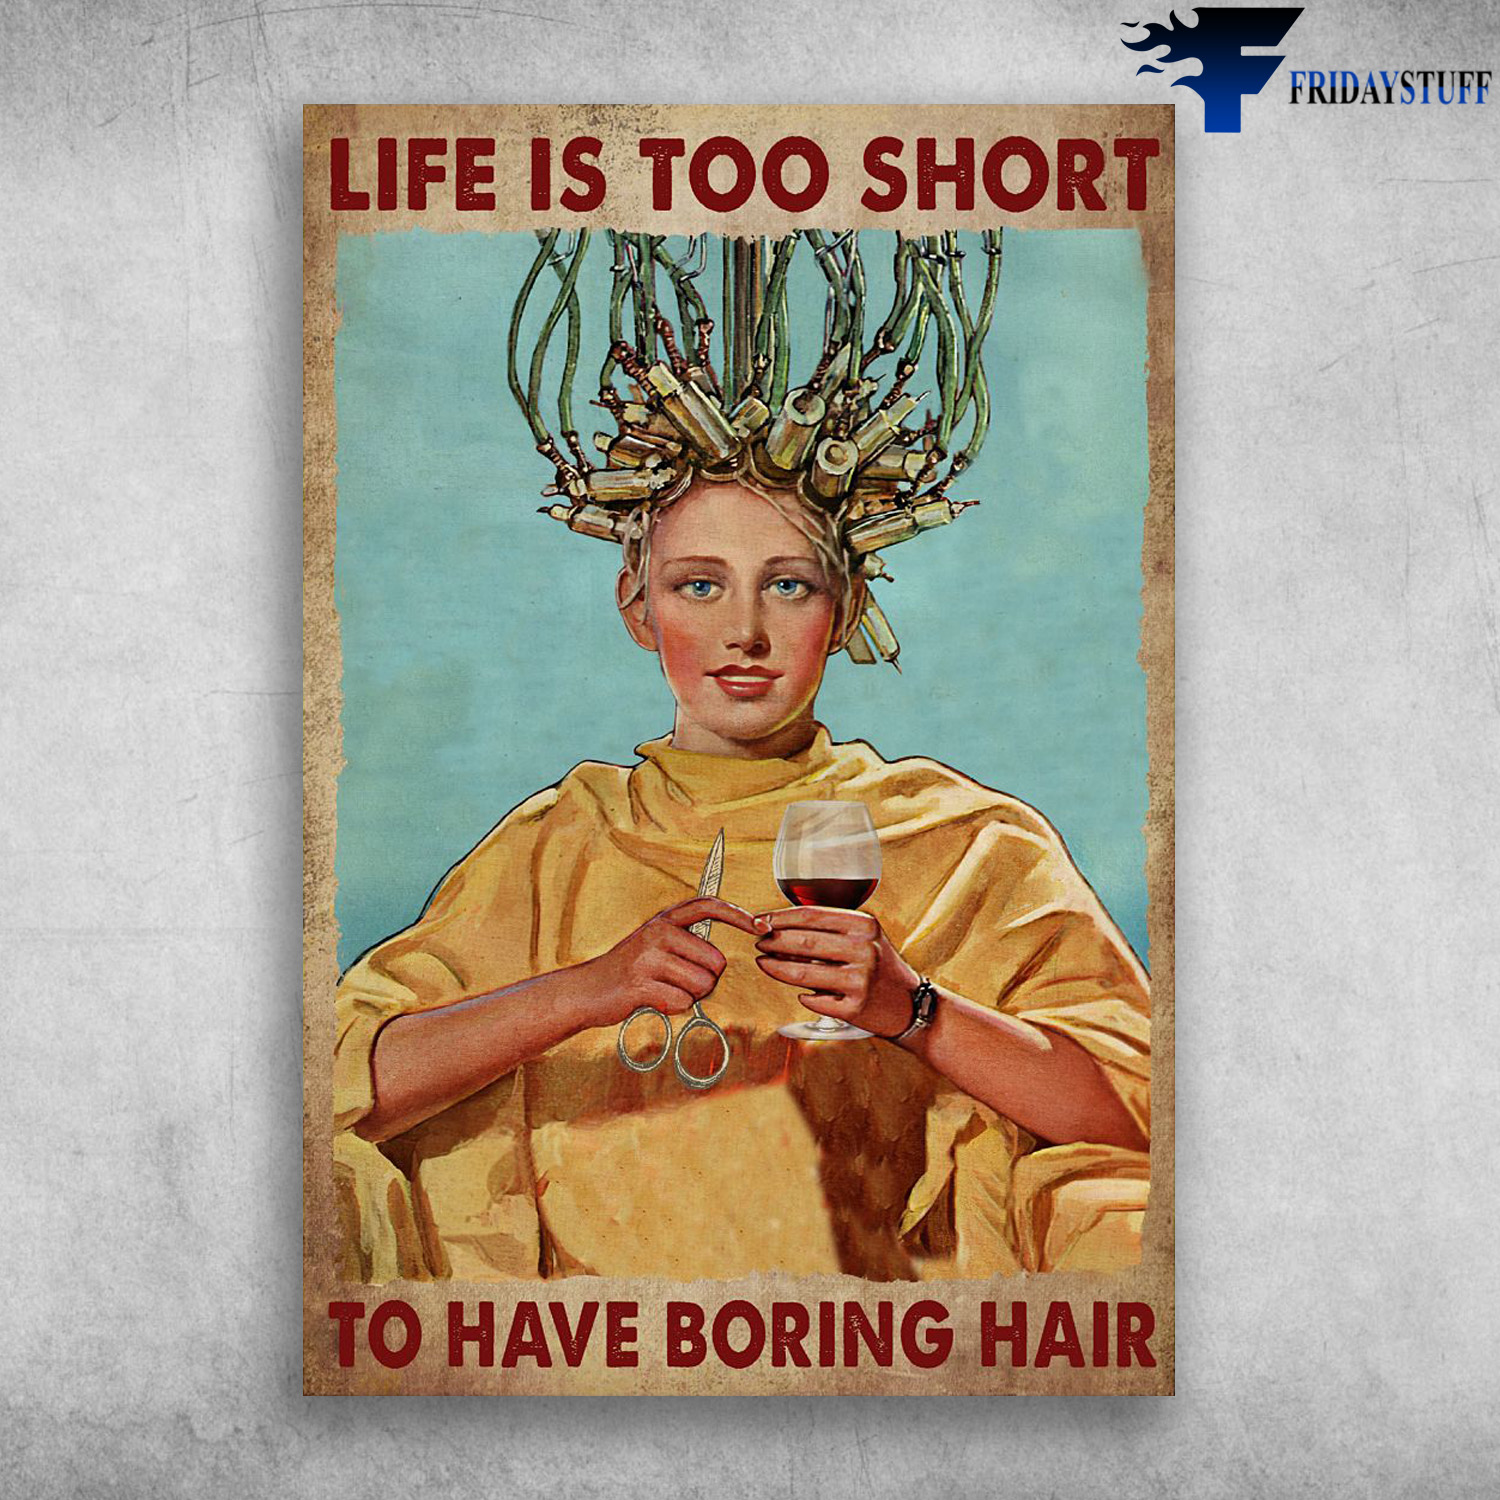 Lady Boring Hair With Wine - Life Too Short, To Have Boring Hair